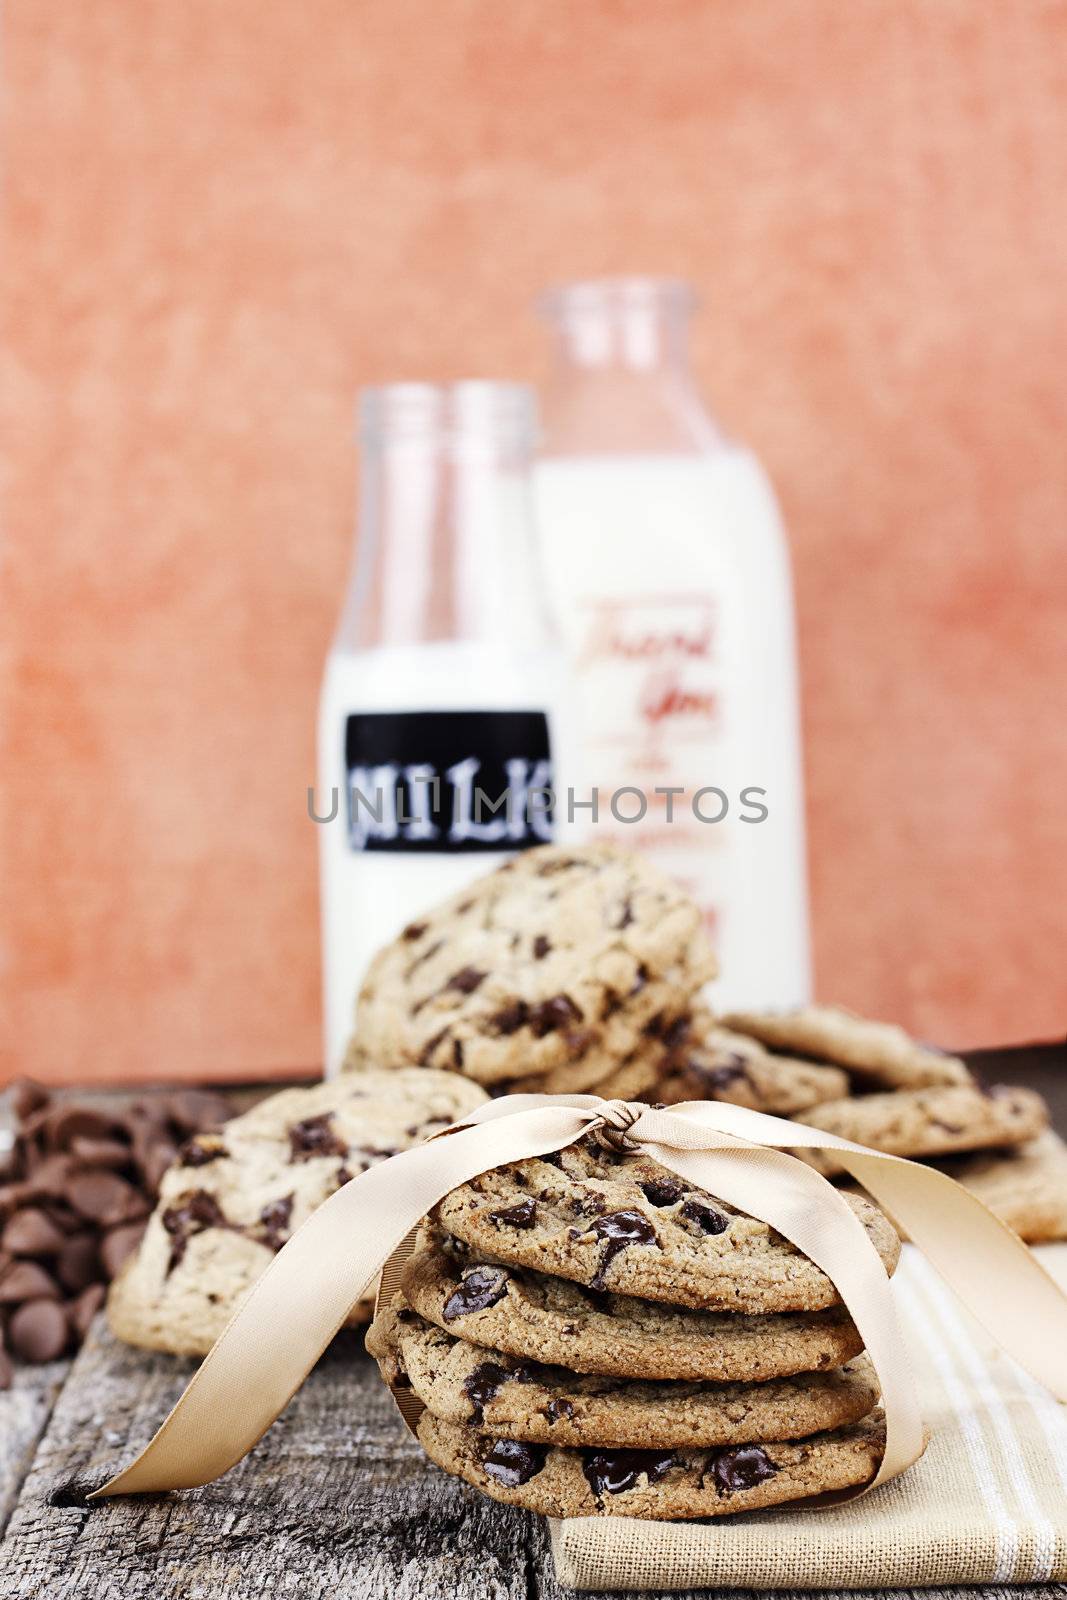 Fresh homemade chocolate chip cookies with chocoate chips and milk in antique milk bottles in the background. Shallow depth of field. 
